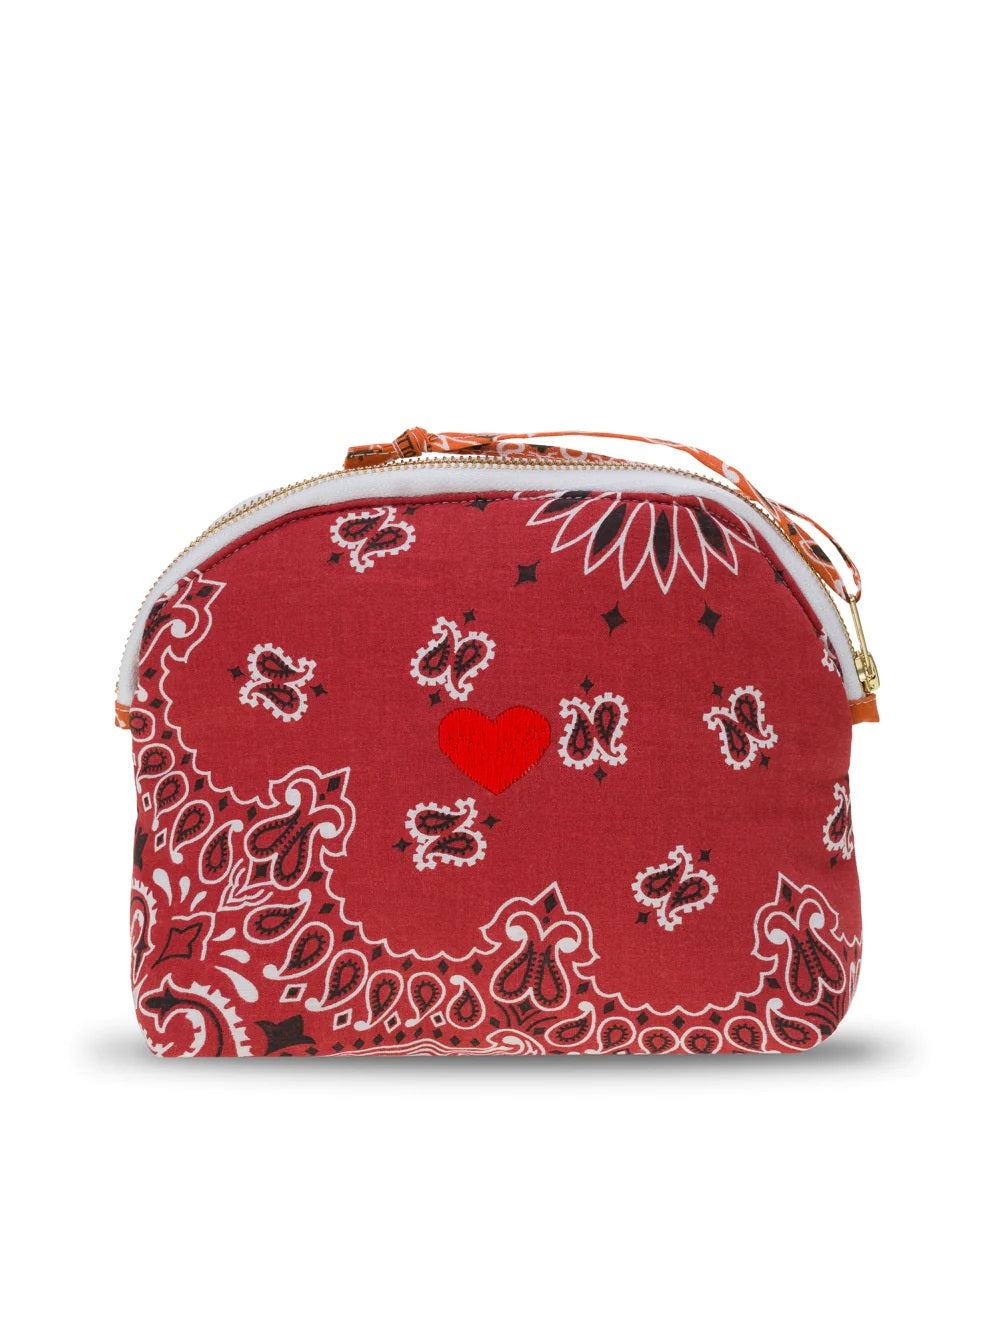 Call It By Your Name Small Vanity Pouch Heart - Vintage Red / Burnt Orange